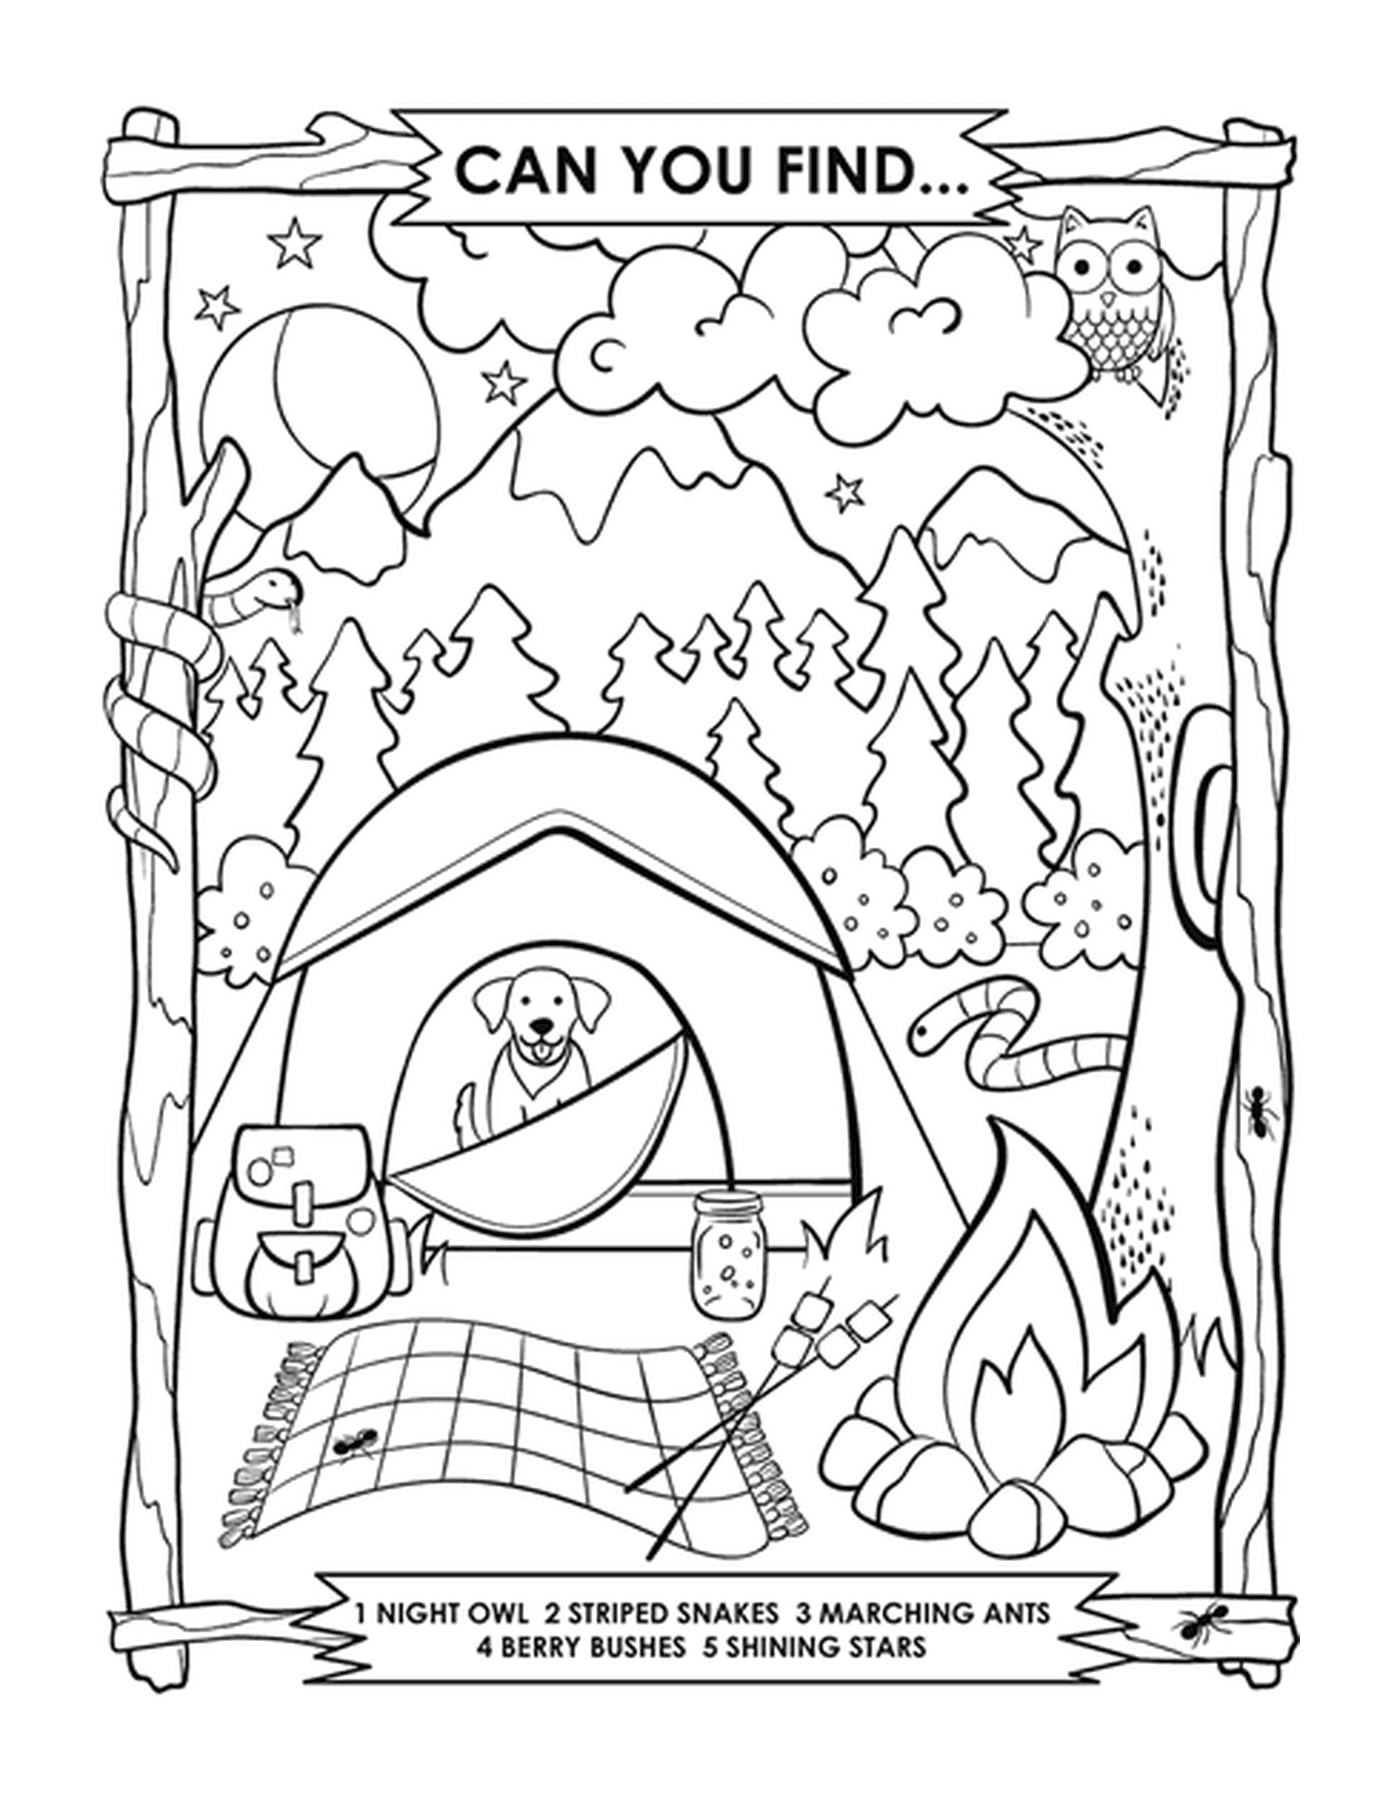  A camping search, find the dog in a tent 